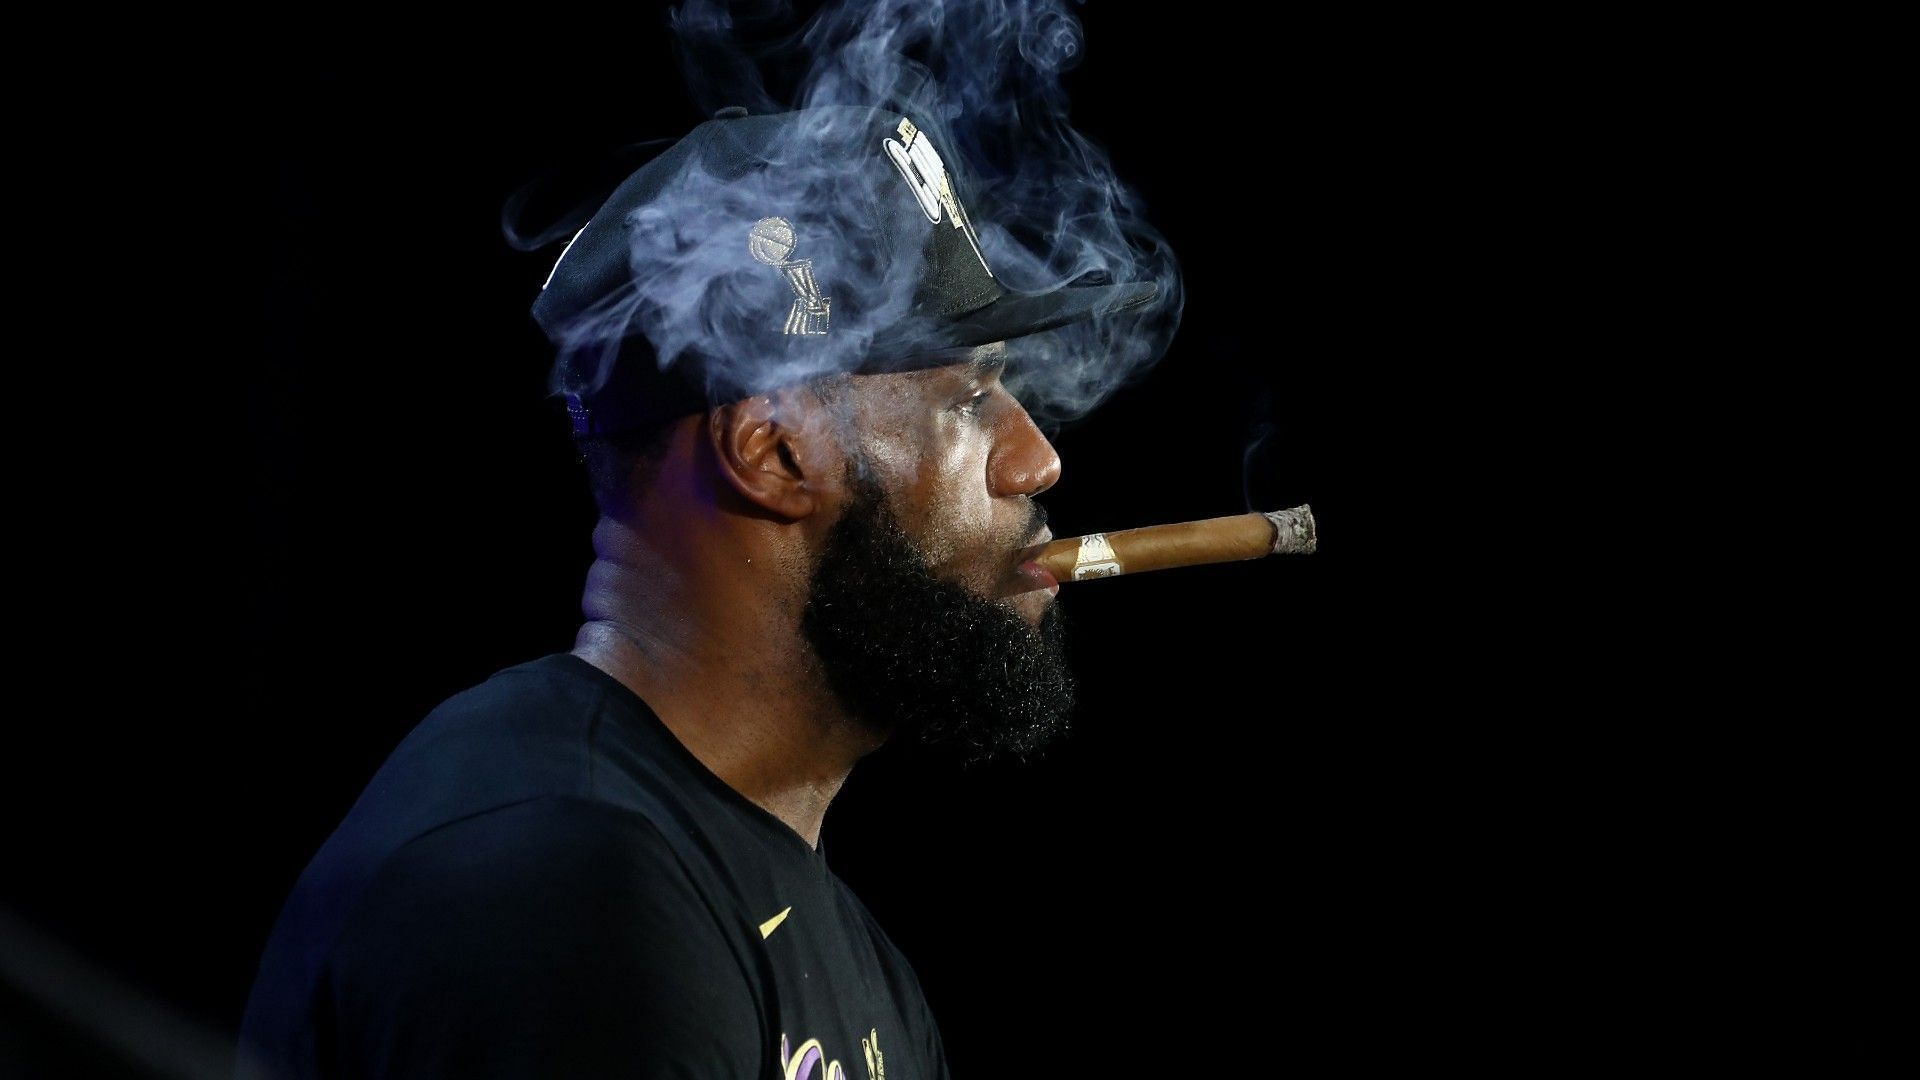 LeBron James entered the arena with a cigar in his hands before the Phoenix Suns-LA Lakers game. [Photo via NBA.com]